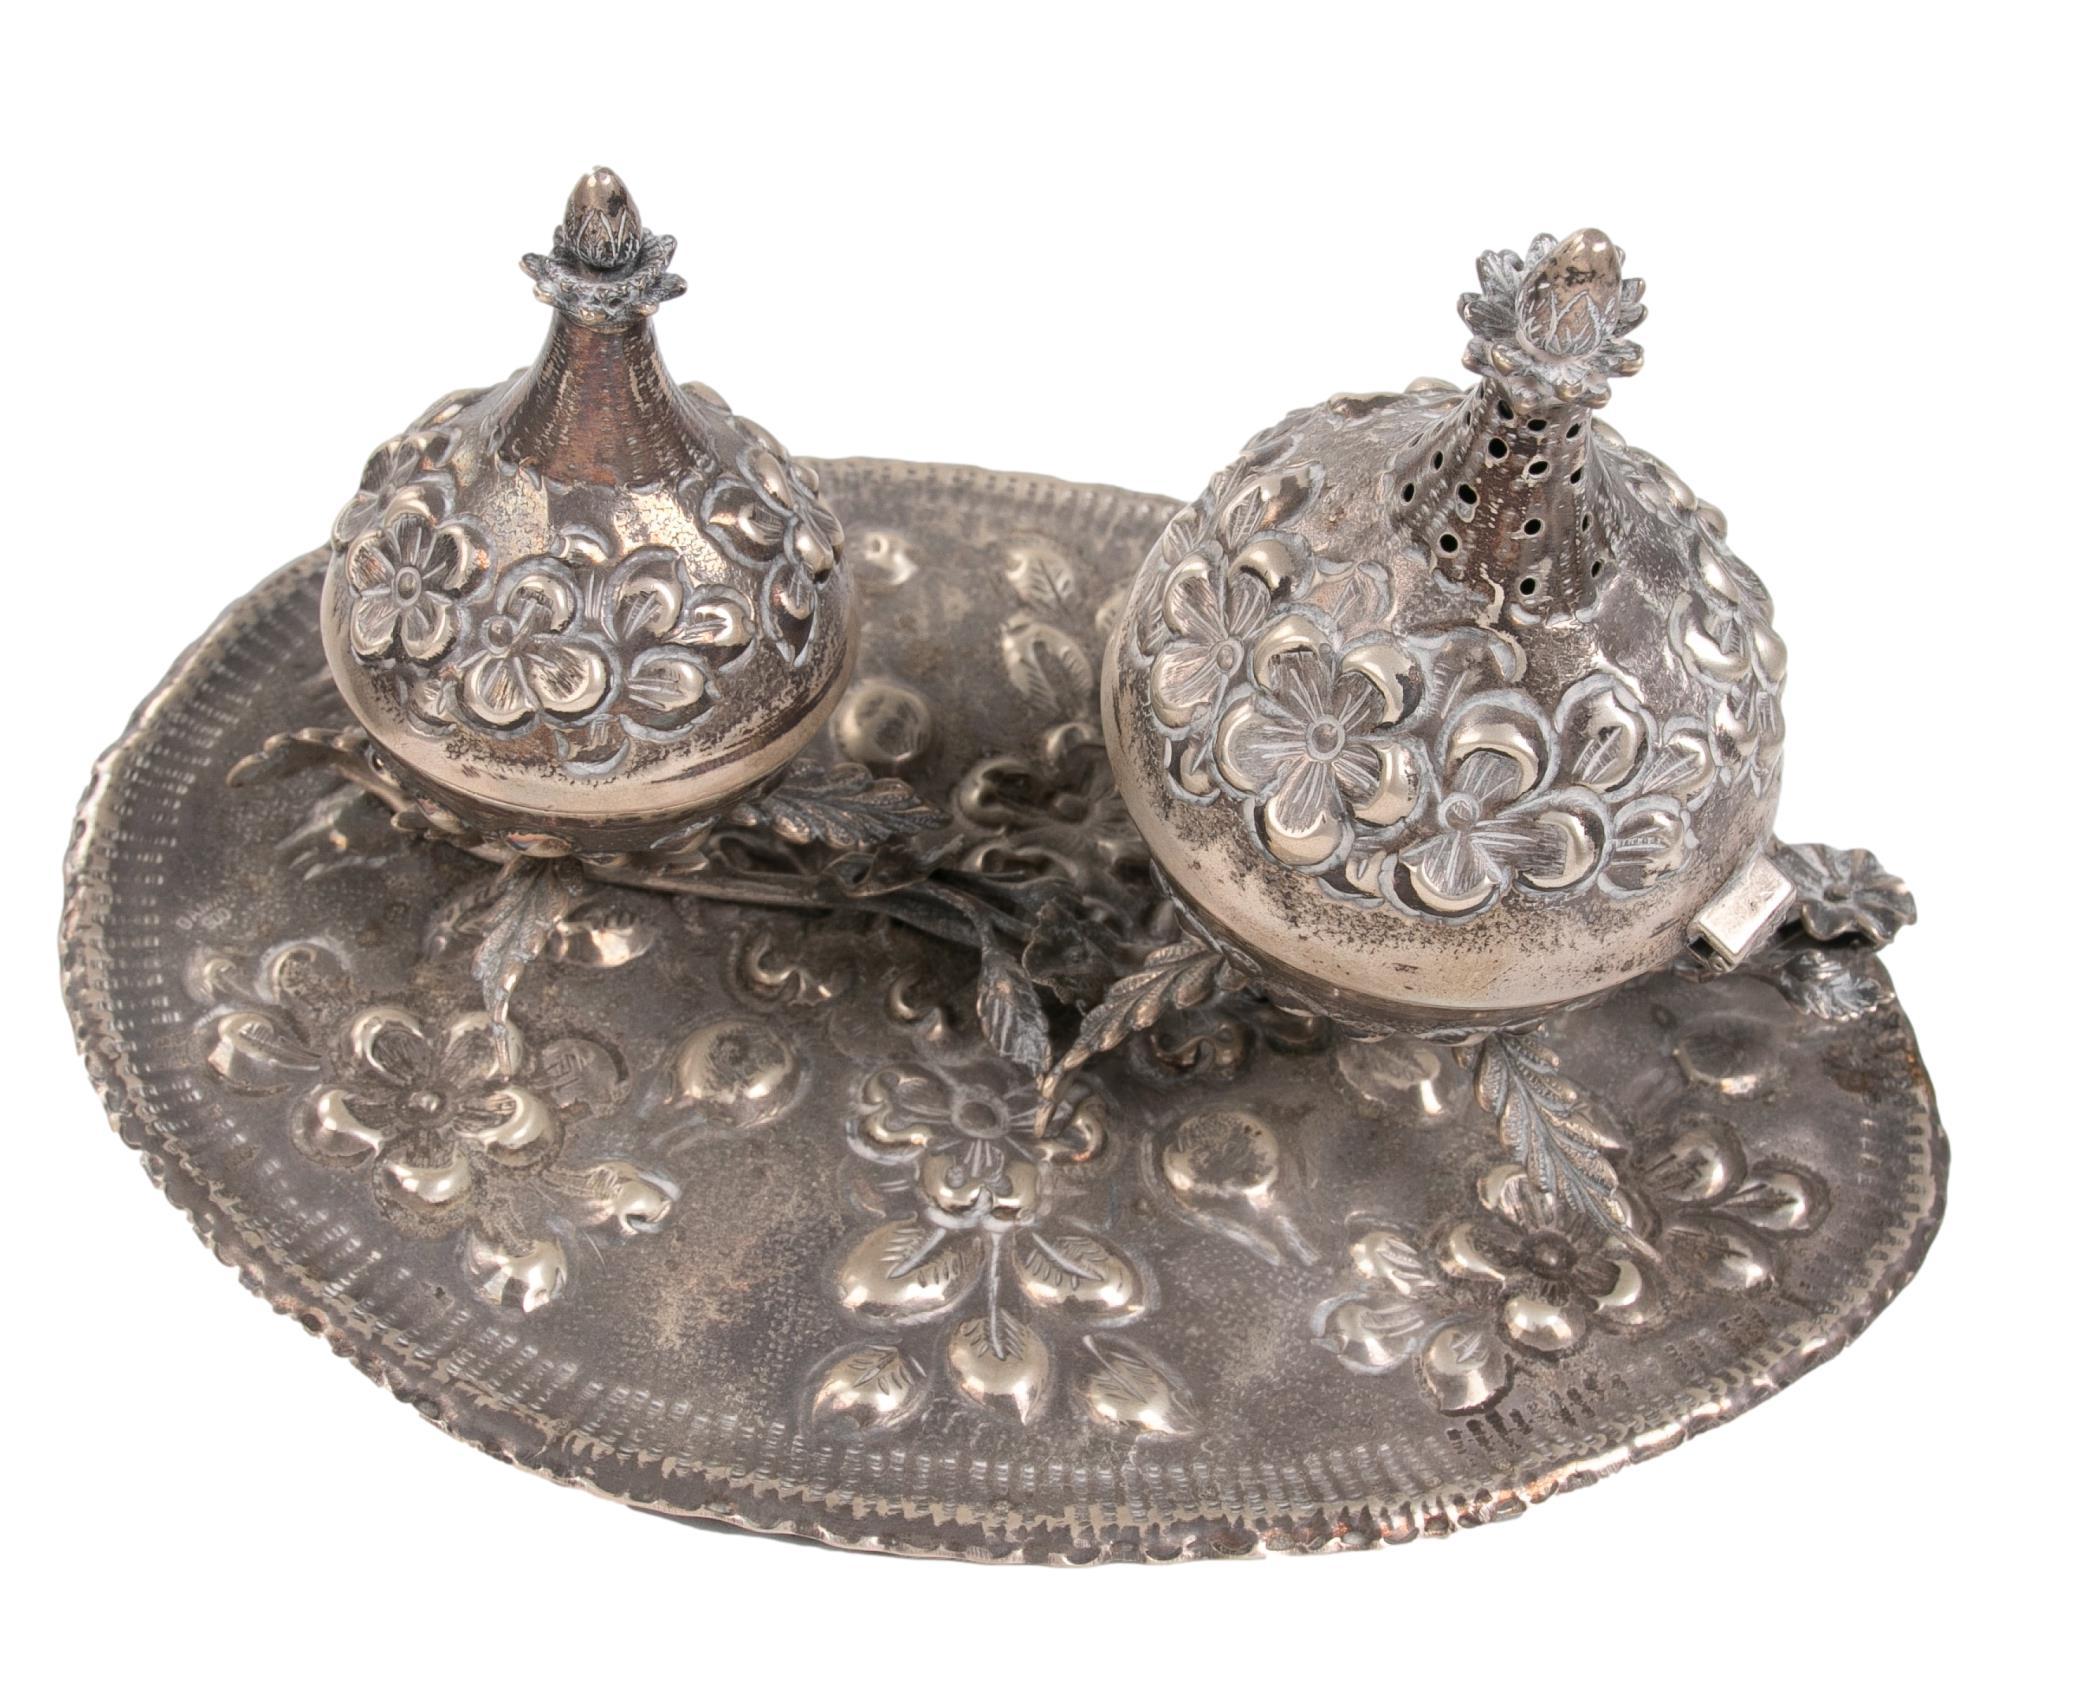 1950s Silver Tray with Two Containers for Storing and Burning Incense.